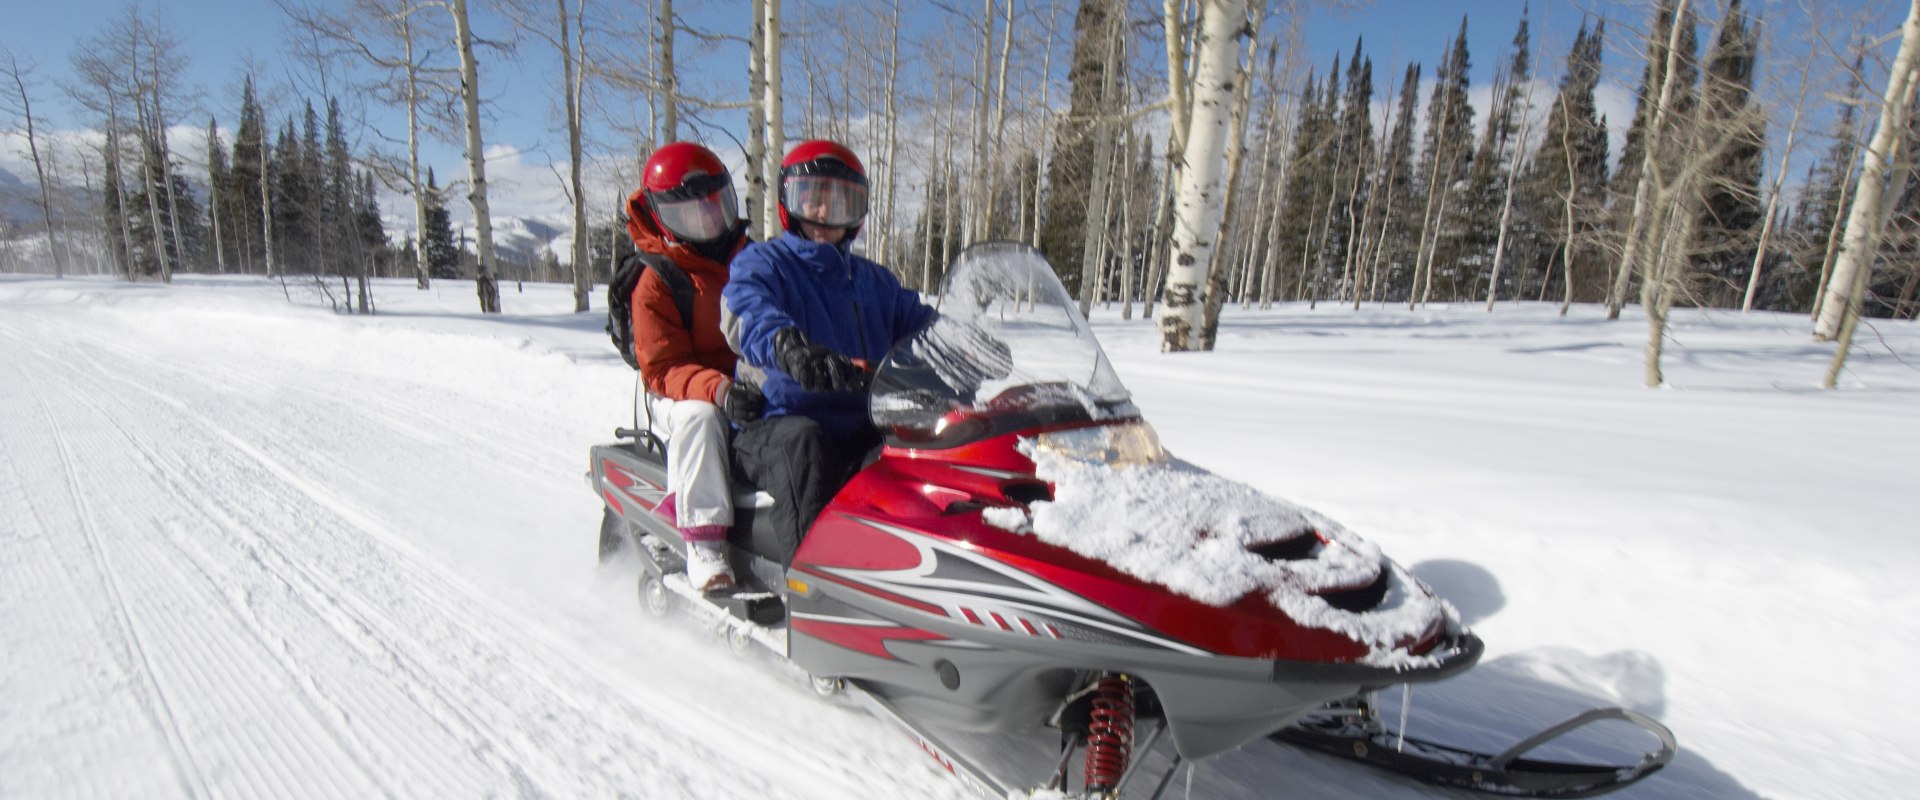 Is snowmobiling strenuous?